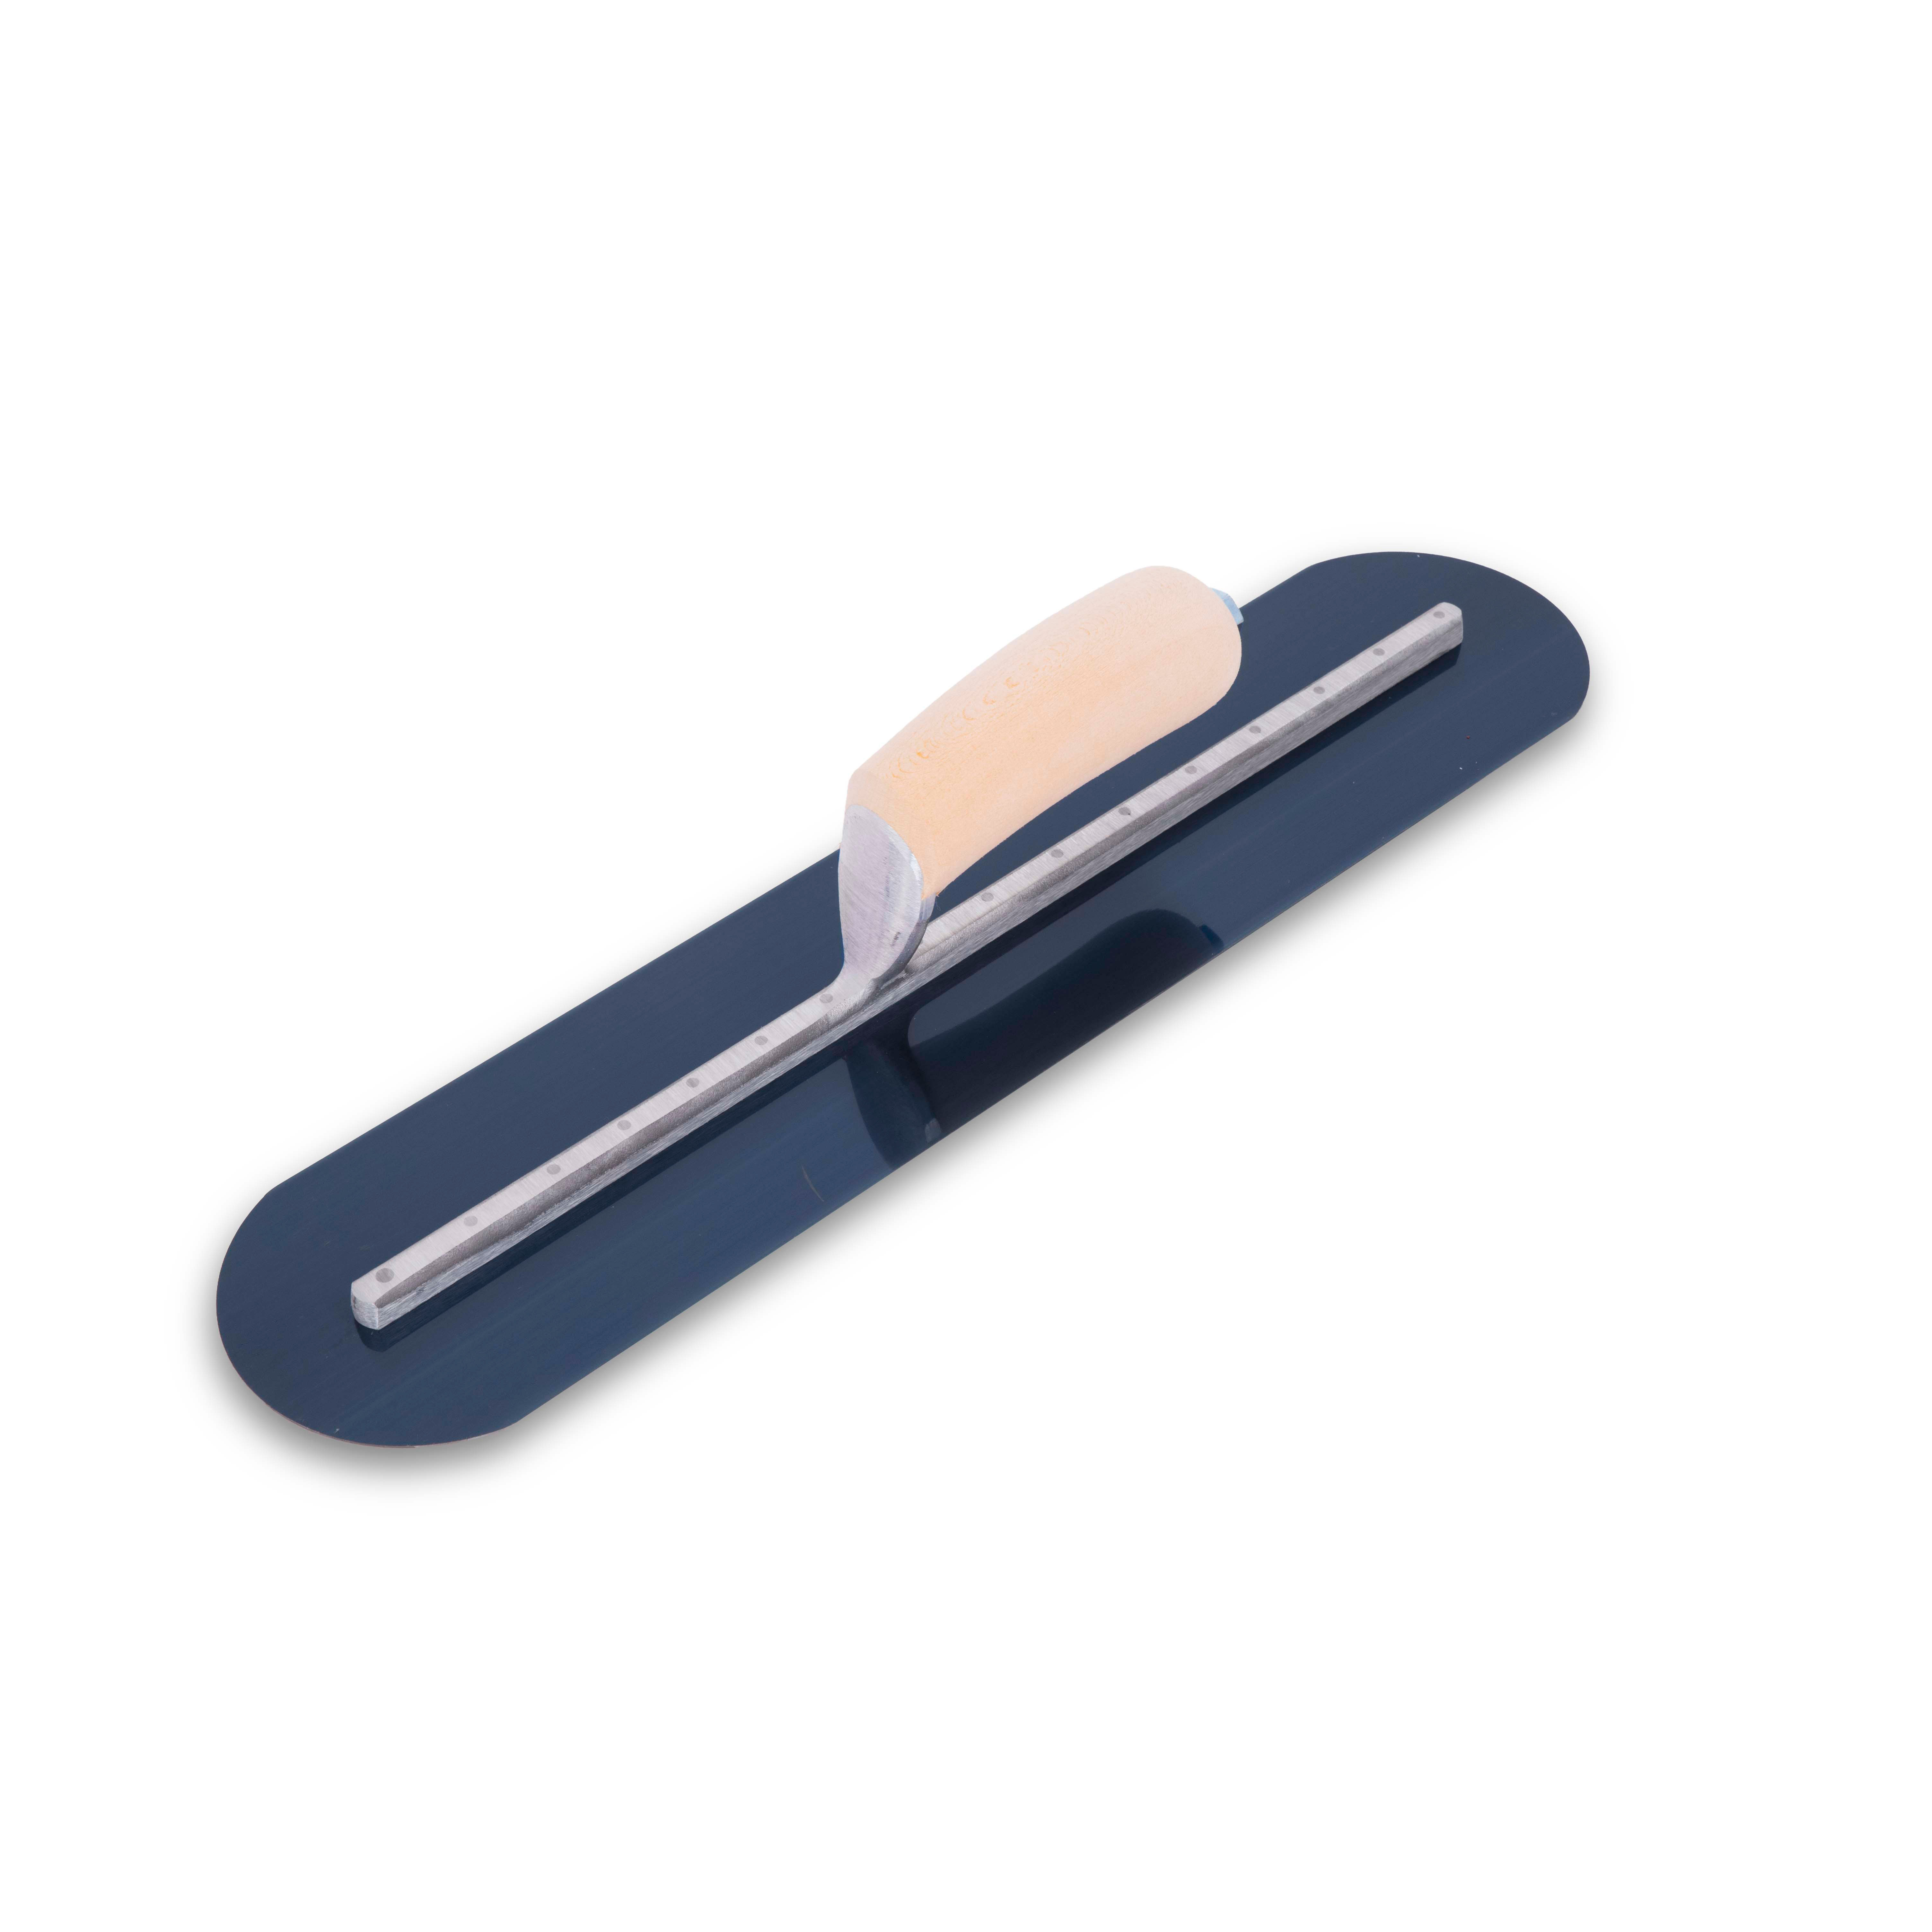 Marshalltown MXS81BFR 18in X 4in Blue Steel Finishing Trowel-Round End with Curved Wood Handle MXS81BFR